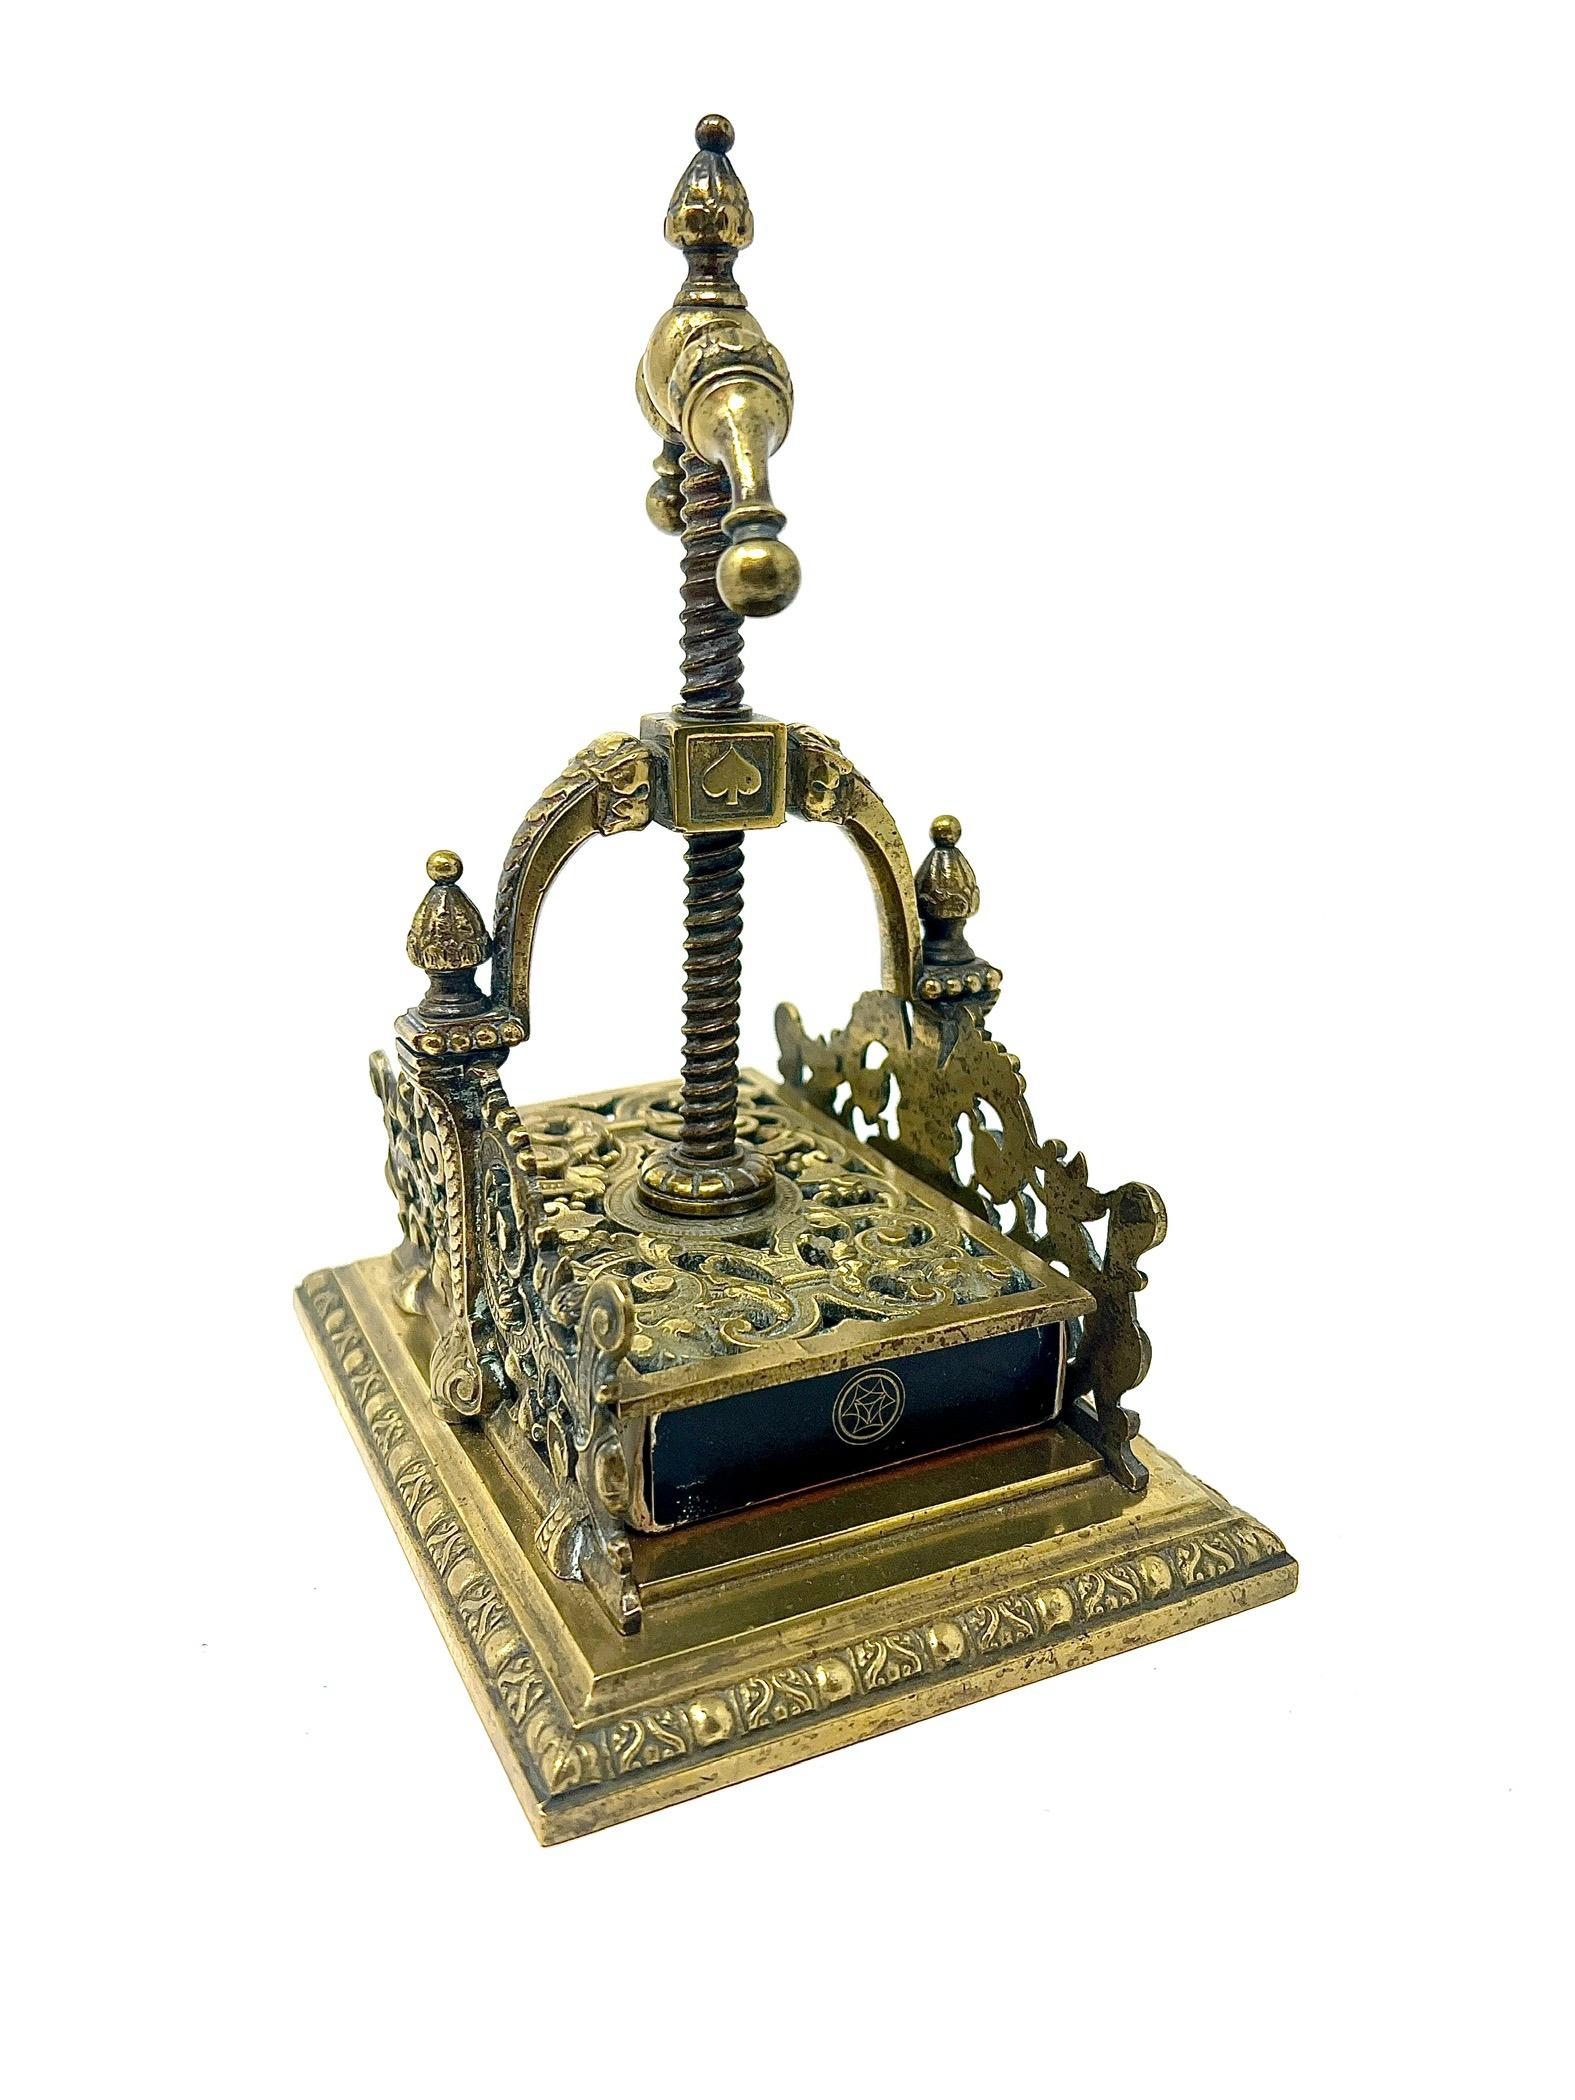 19th Century Rare Antique English Victorian Solid Brass Playing Card Press, Circa 1880-1890. For Sale